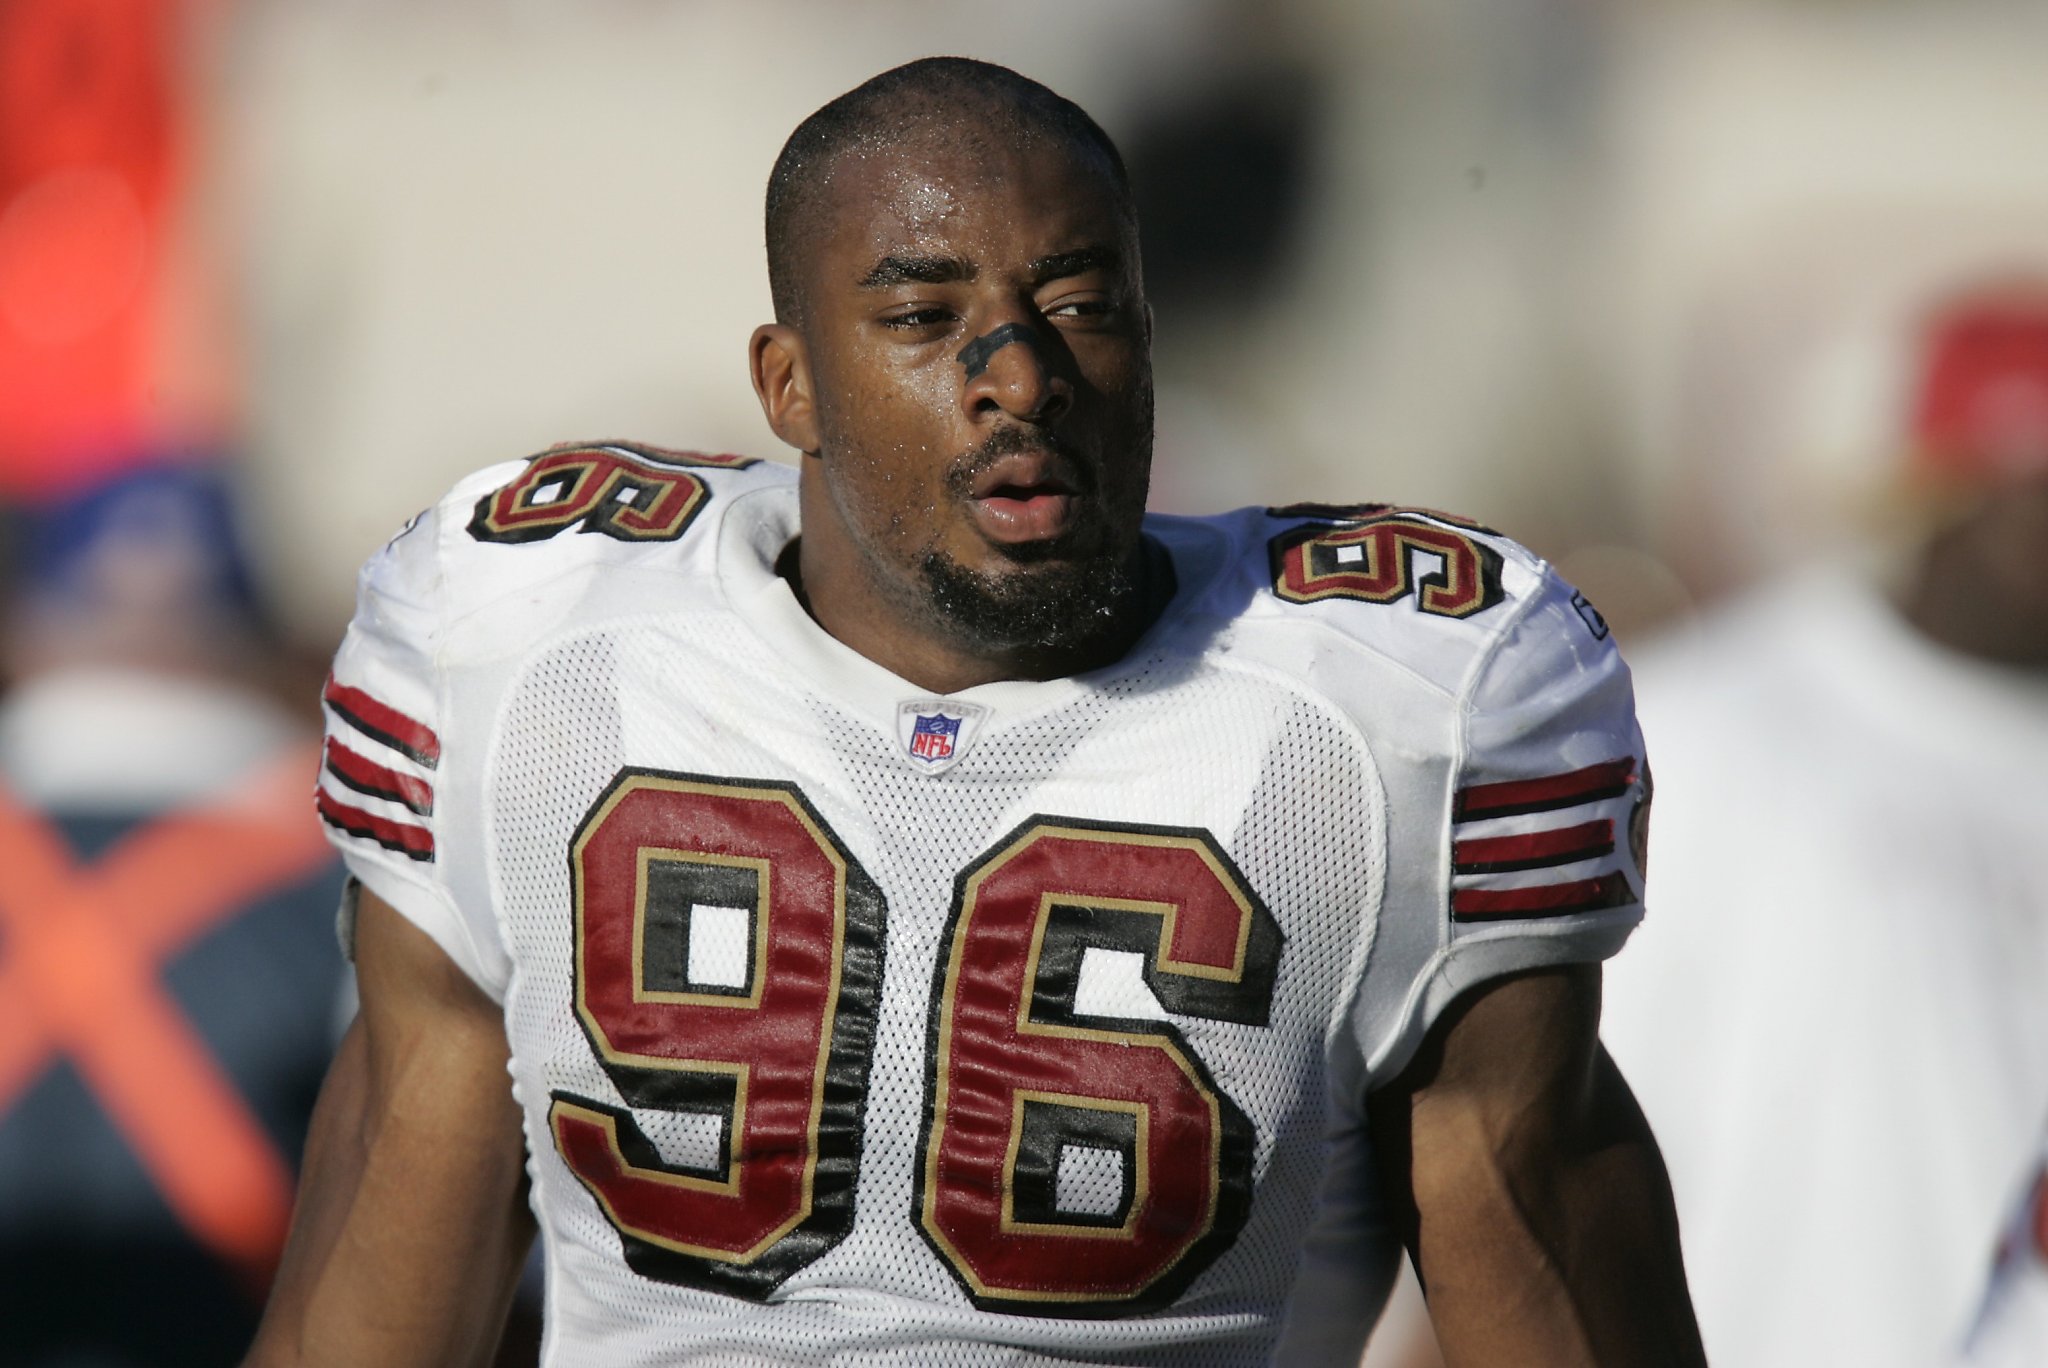 NFL veteran Andre Carter back at Cal as student, coach